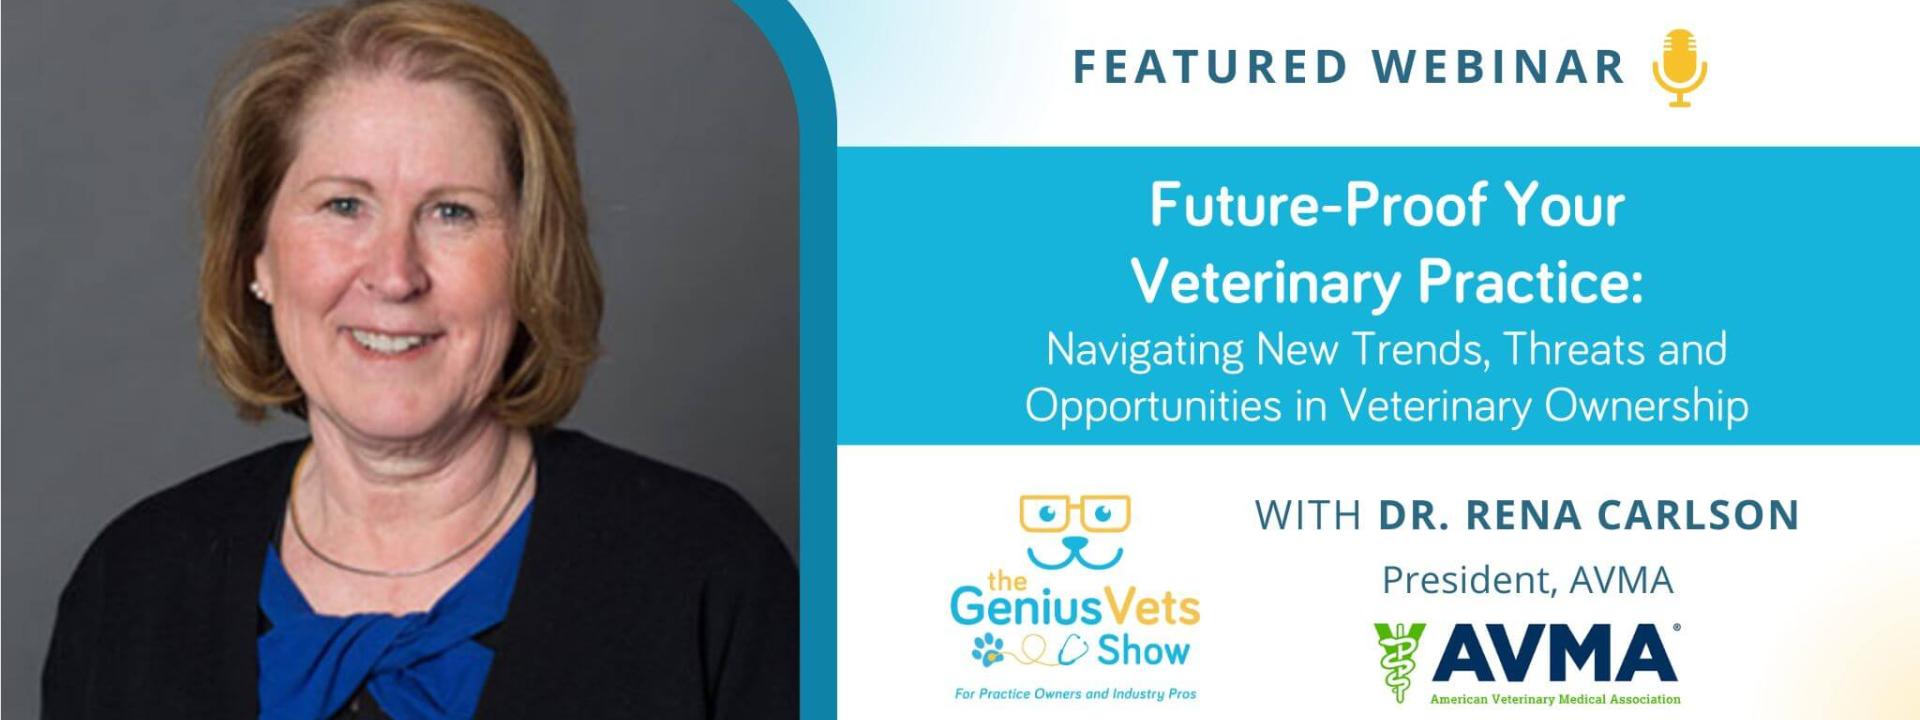 Future-Proof Your Veterinary Practice with Dr. Rena Carlson